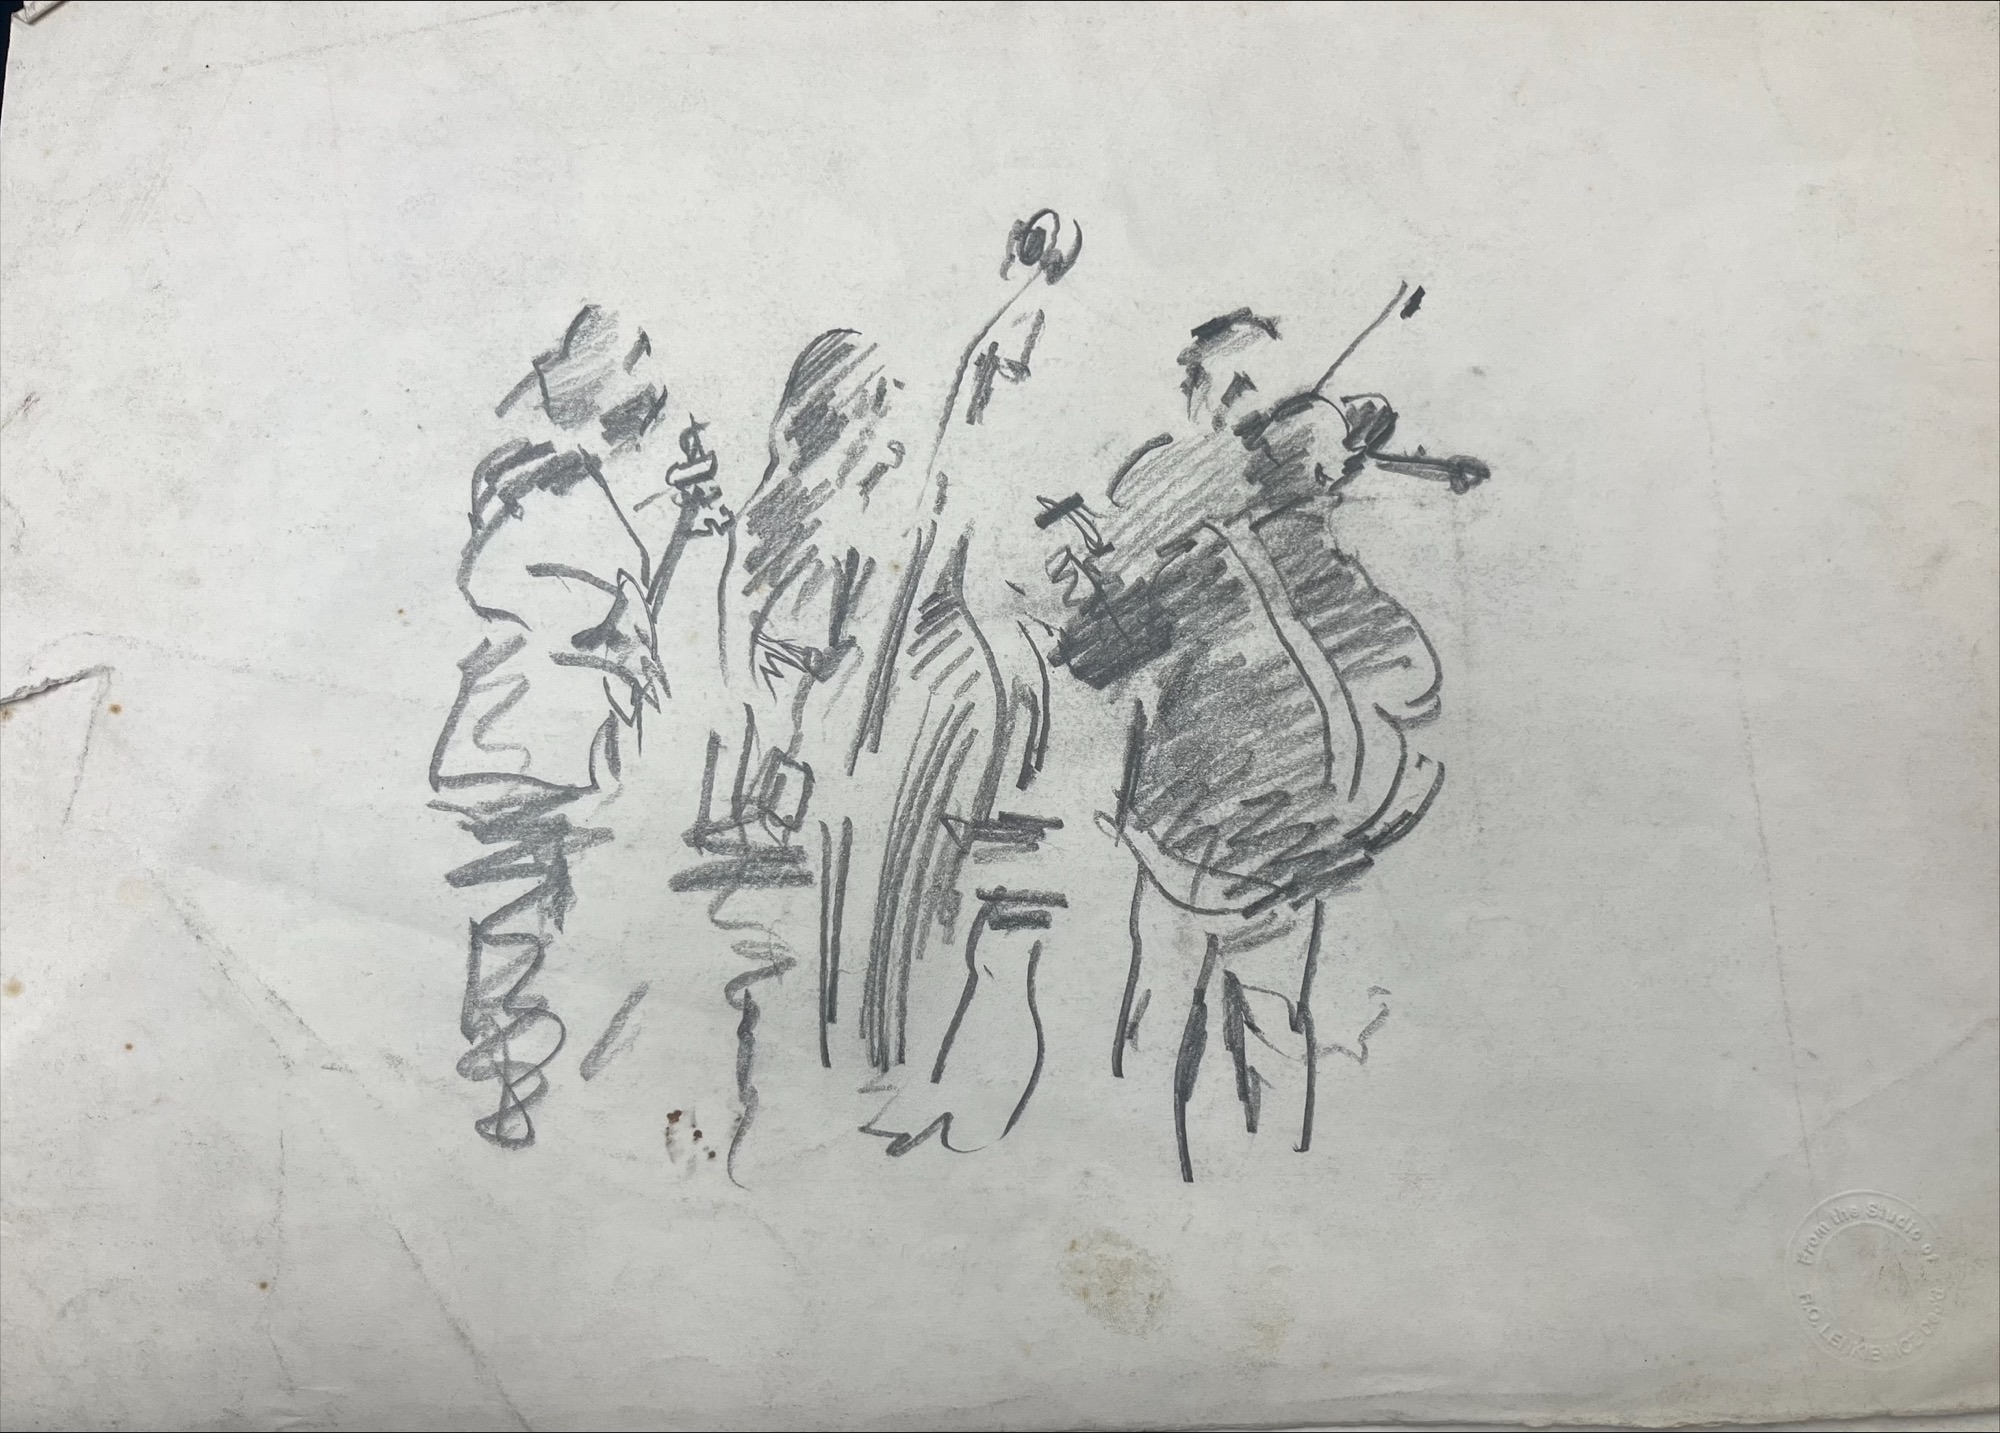 Robert Lenkiewicz (1941-2002) three early drawings in blue biro and pencil, one of the guitarists is - Image 2 of 3